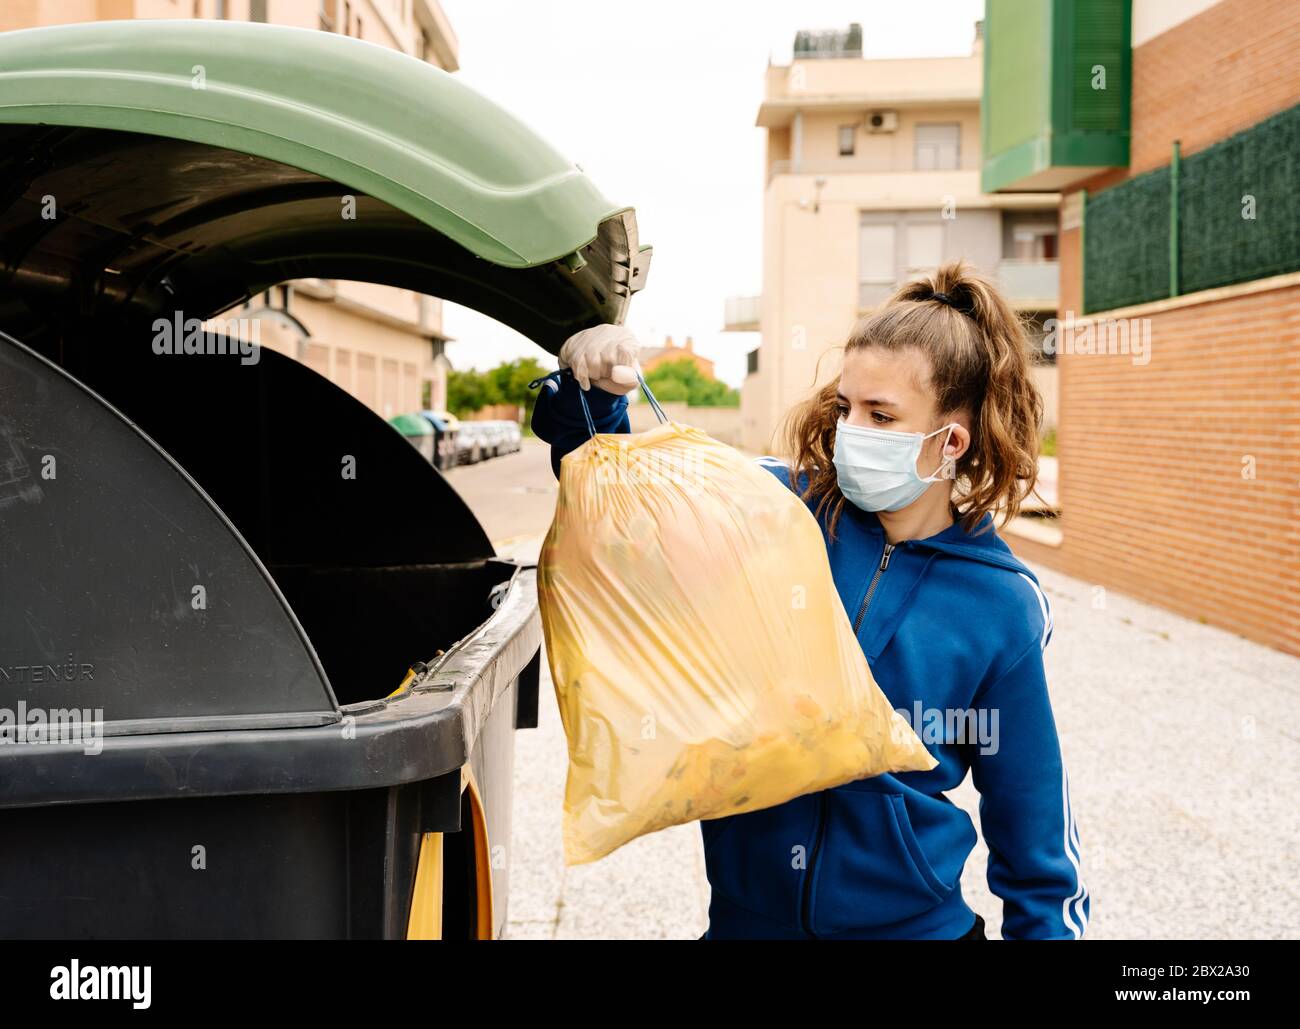 https://c8.alamy.com/comp/2BX2A30/girl-throwing-the-a-yellow-trash-bag-into-a-green-recycling-container-open-in-the-street-the-teenager-is-wearing-face-mask-and-gloves-to-protect-hers-2BX2A30.jpg